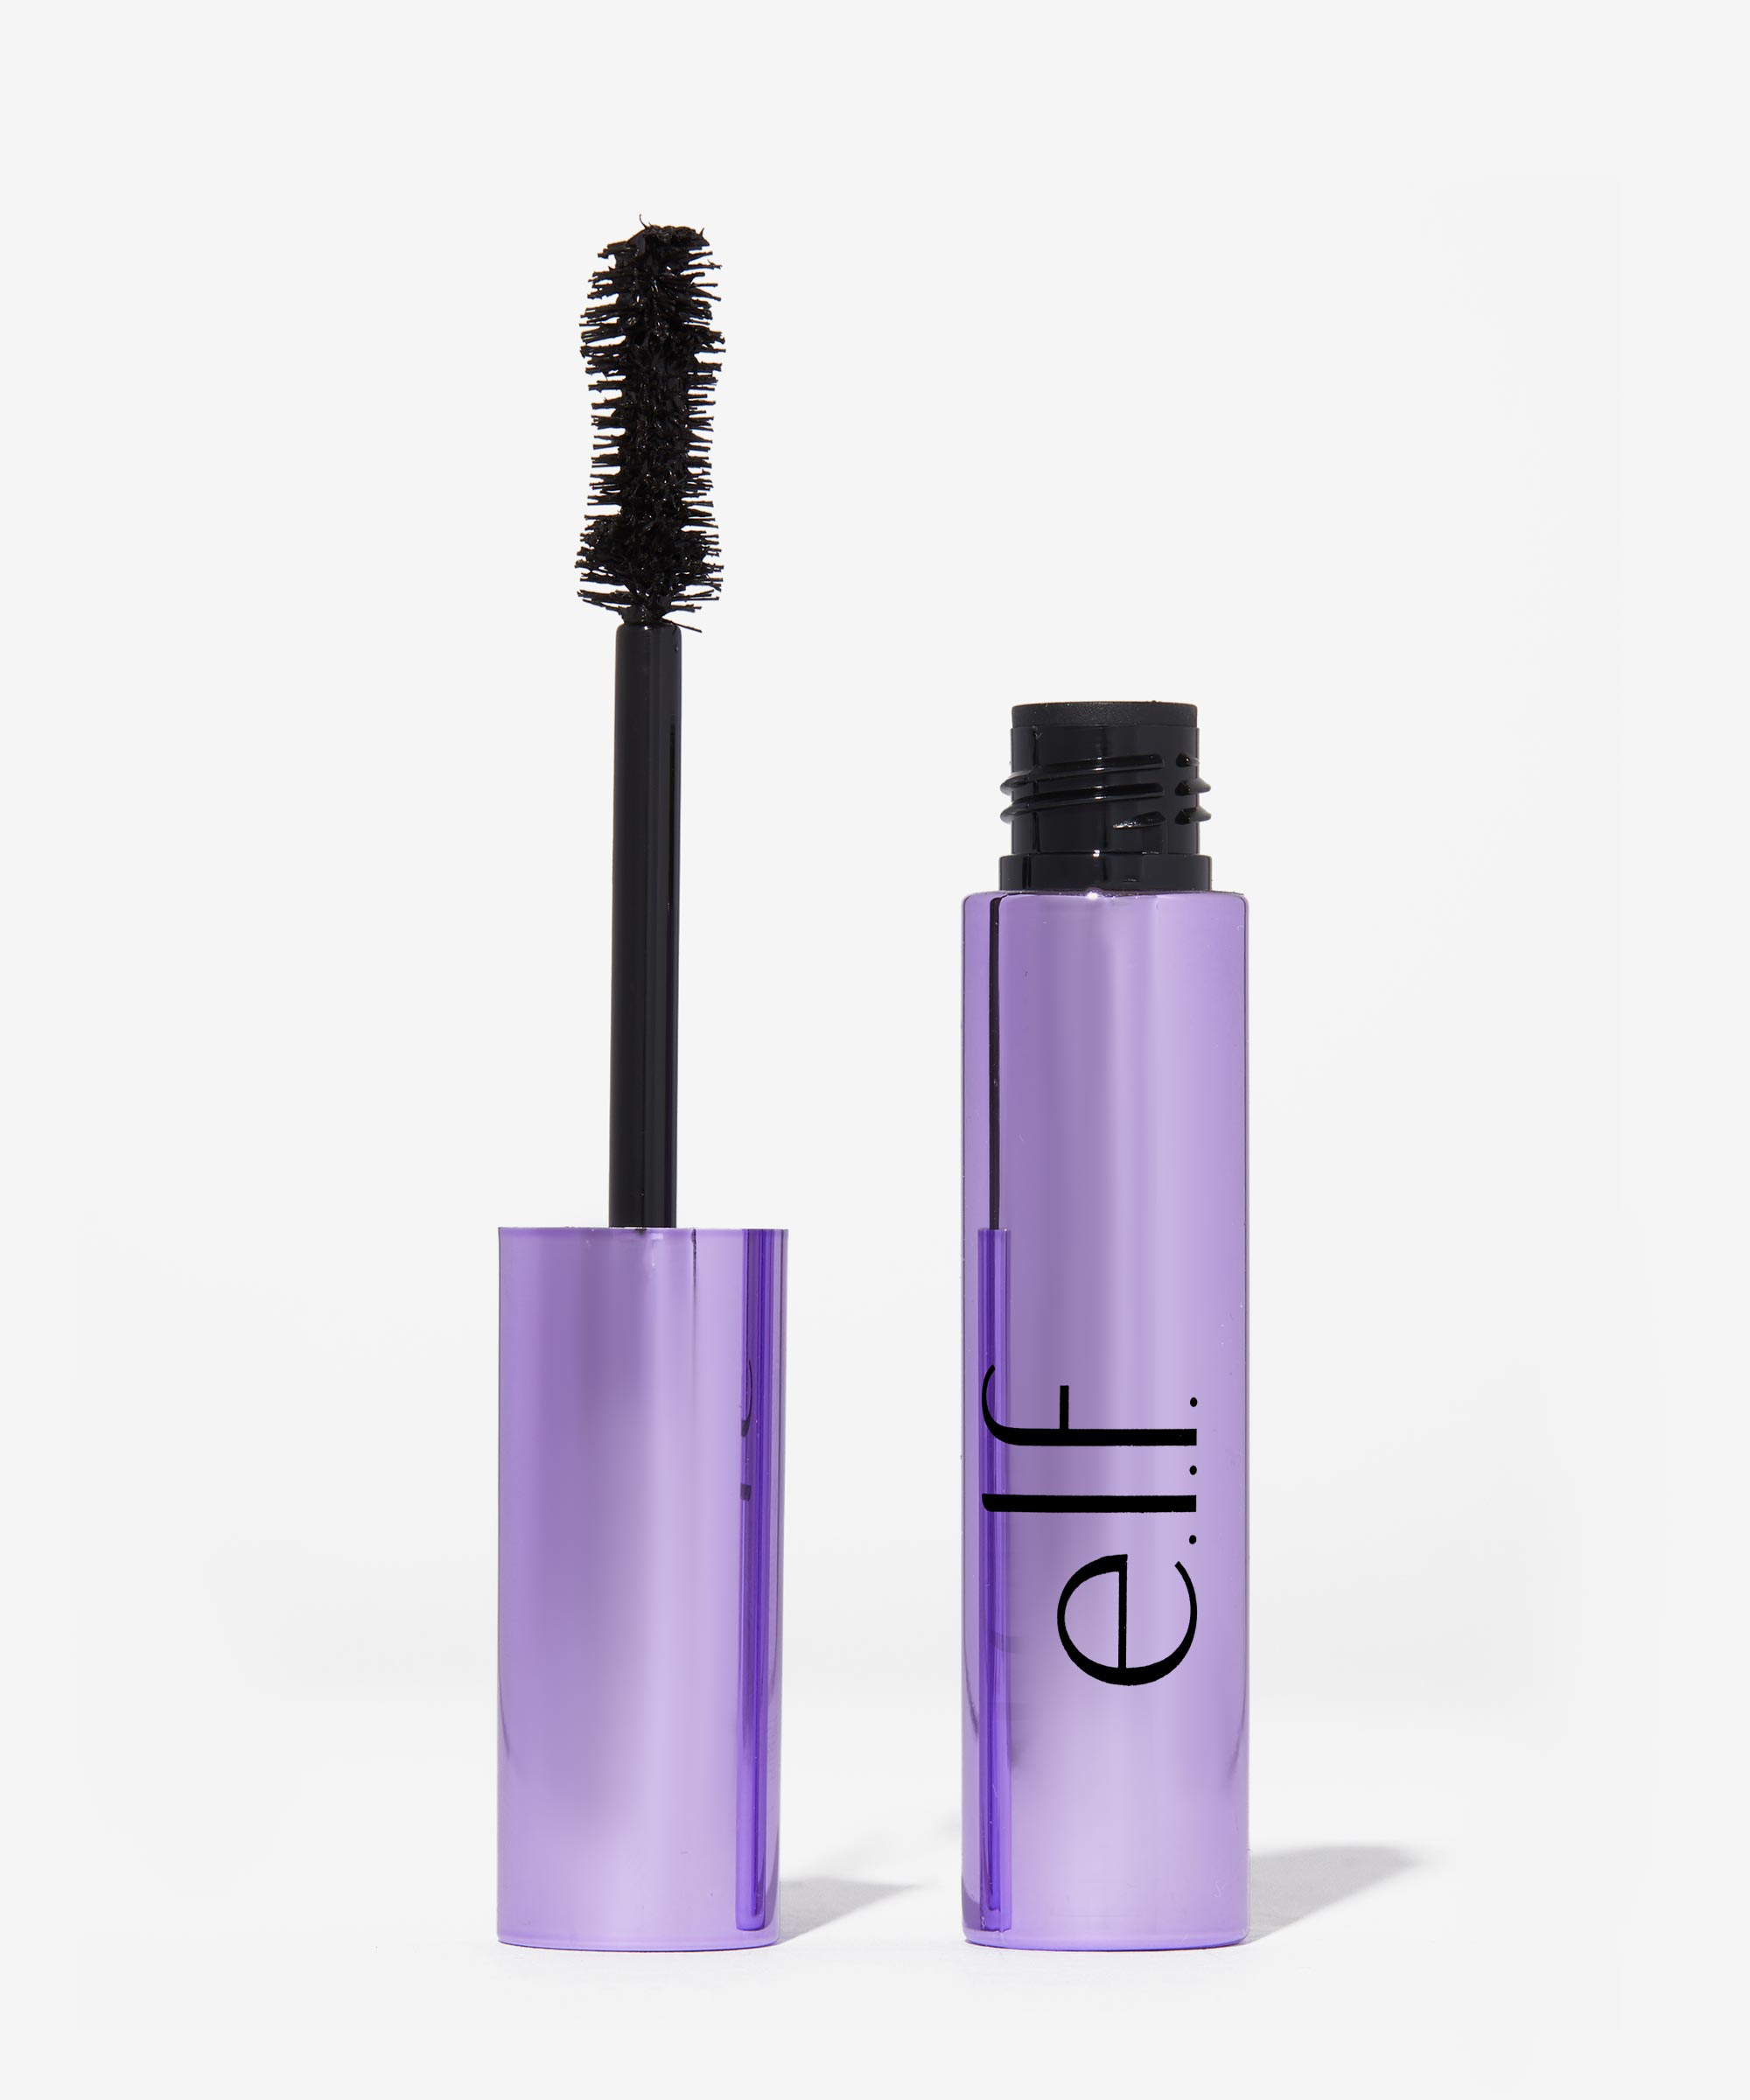 7 Holy Grail e.l.f. Cosmetics Products Your Makeup Bag Needs